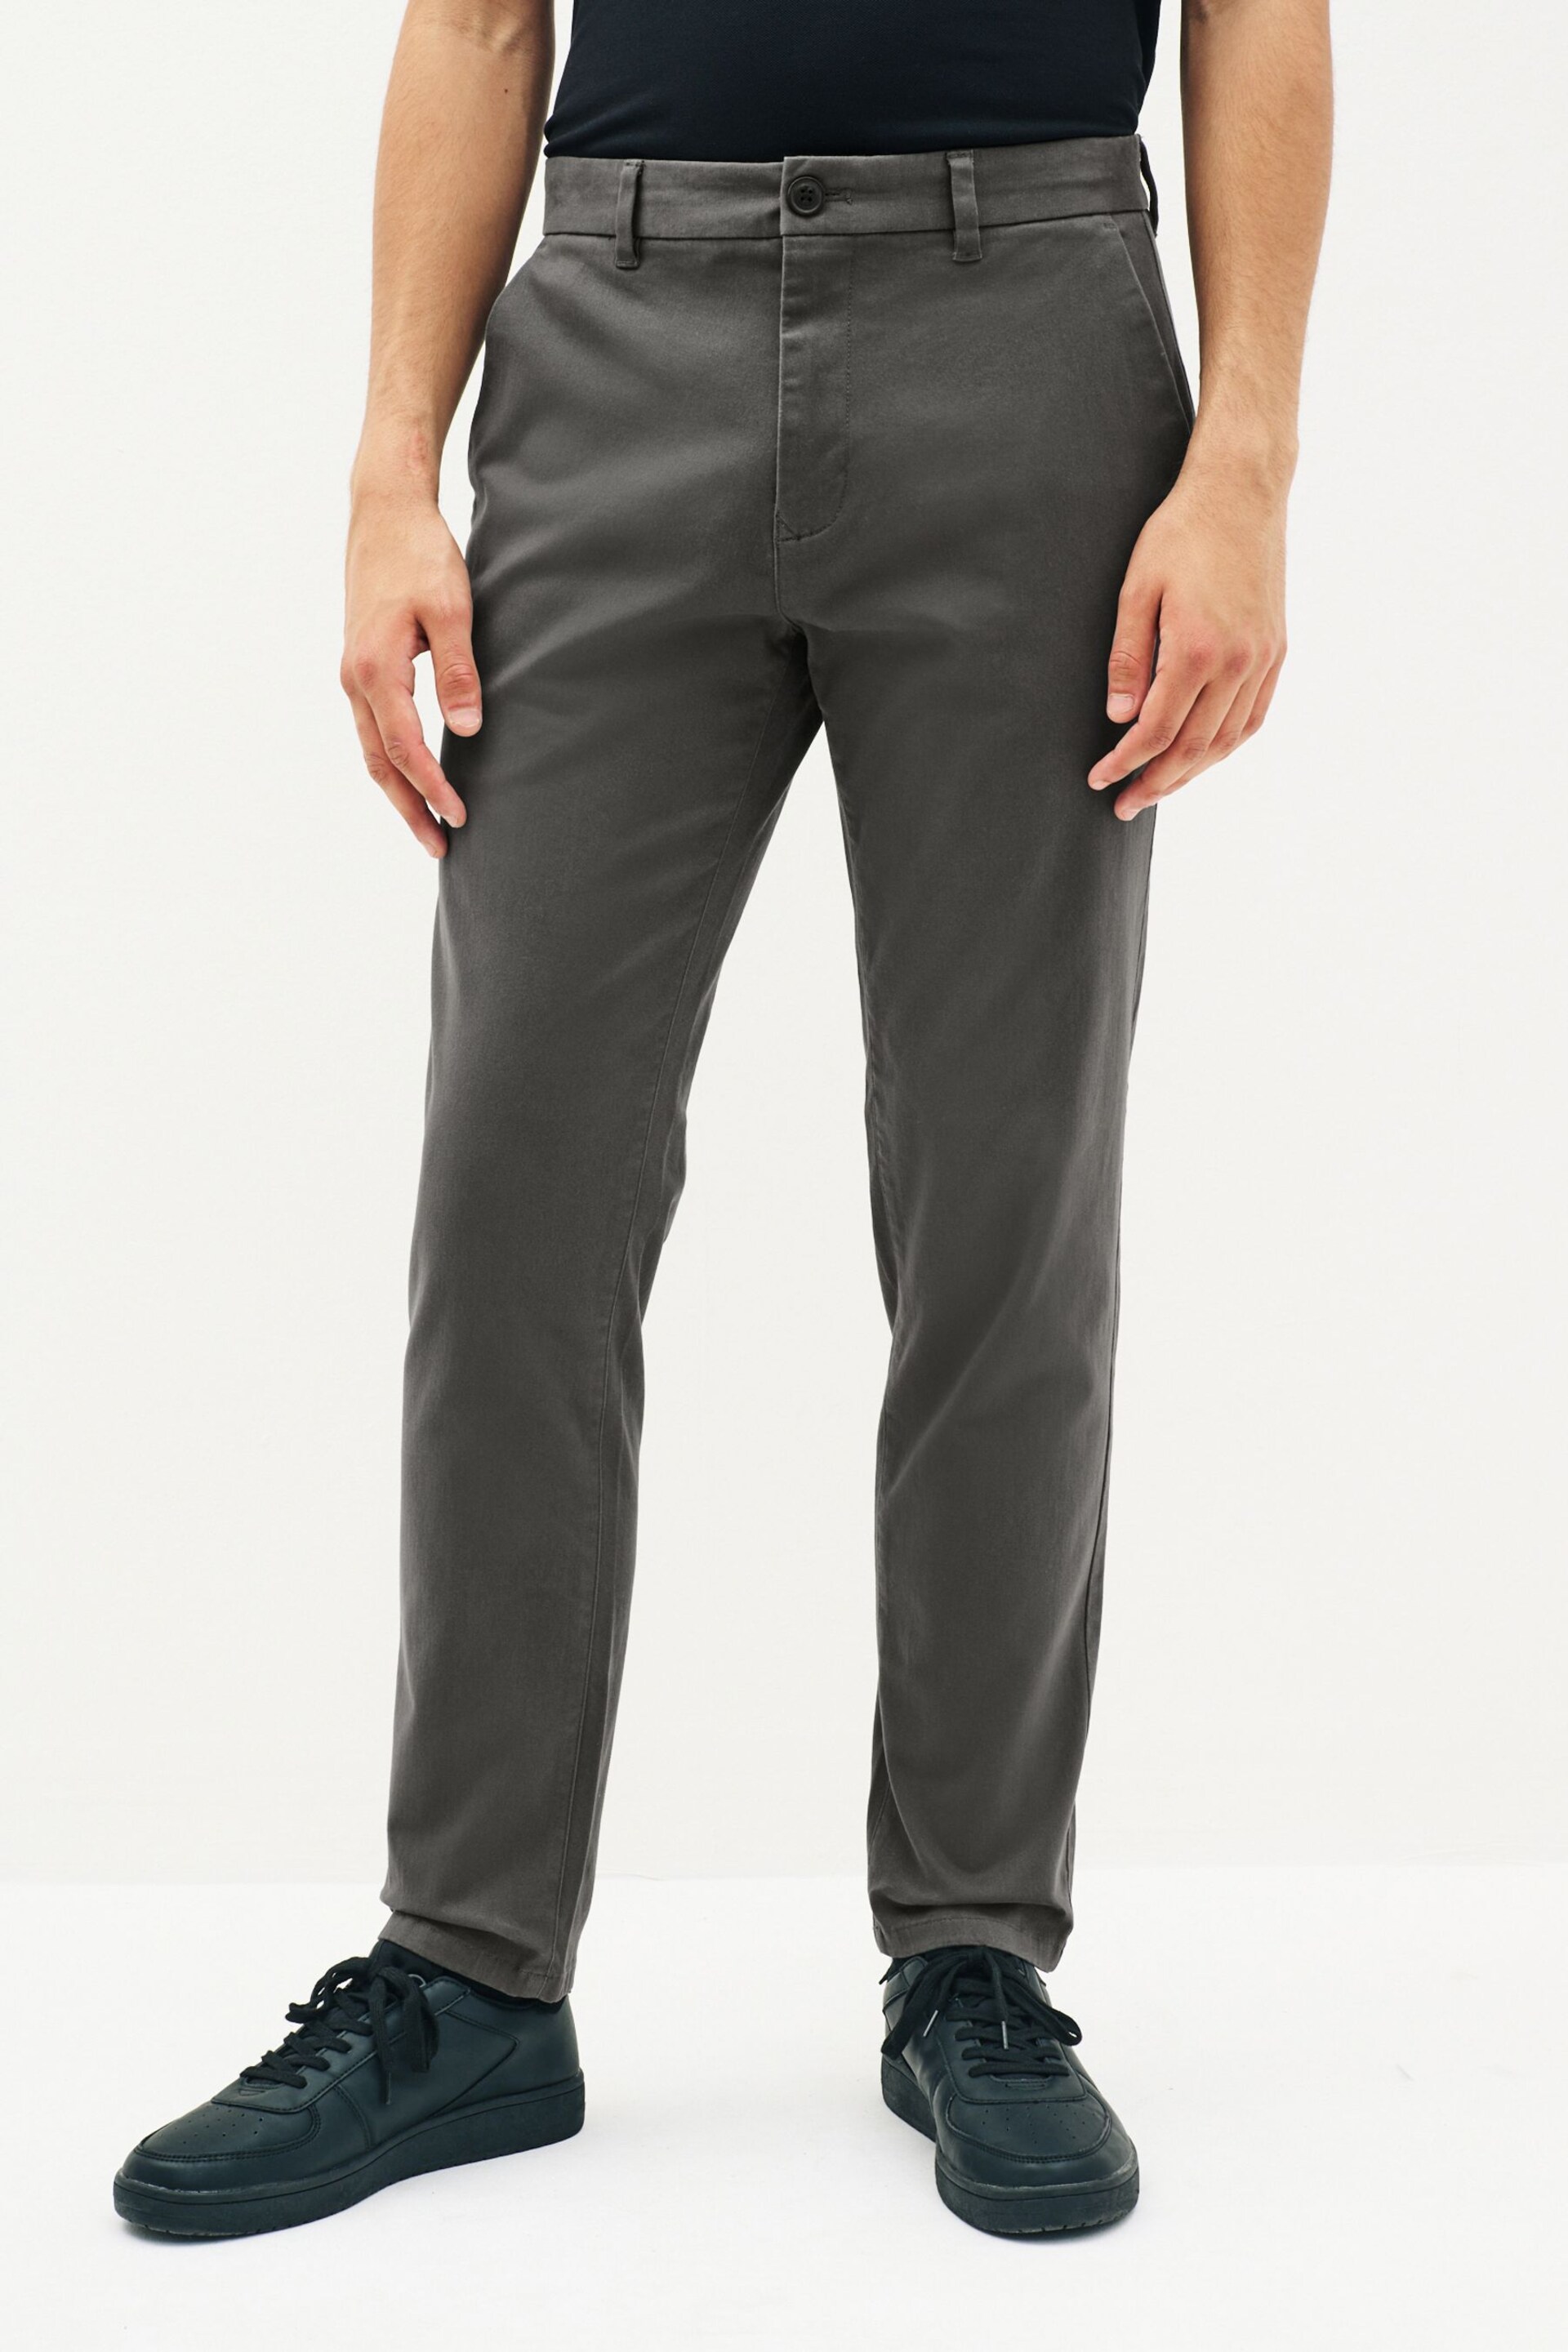 Dark Grey Regular Tapered Fit Stretch Chinos Trousers - Image 1 of 8